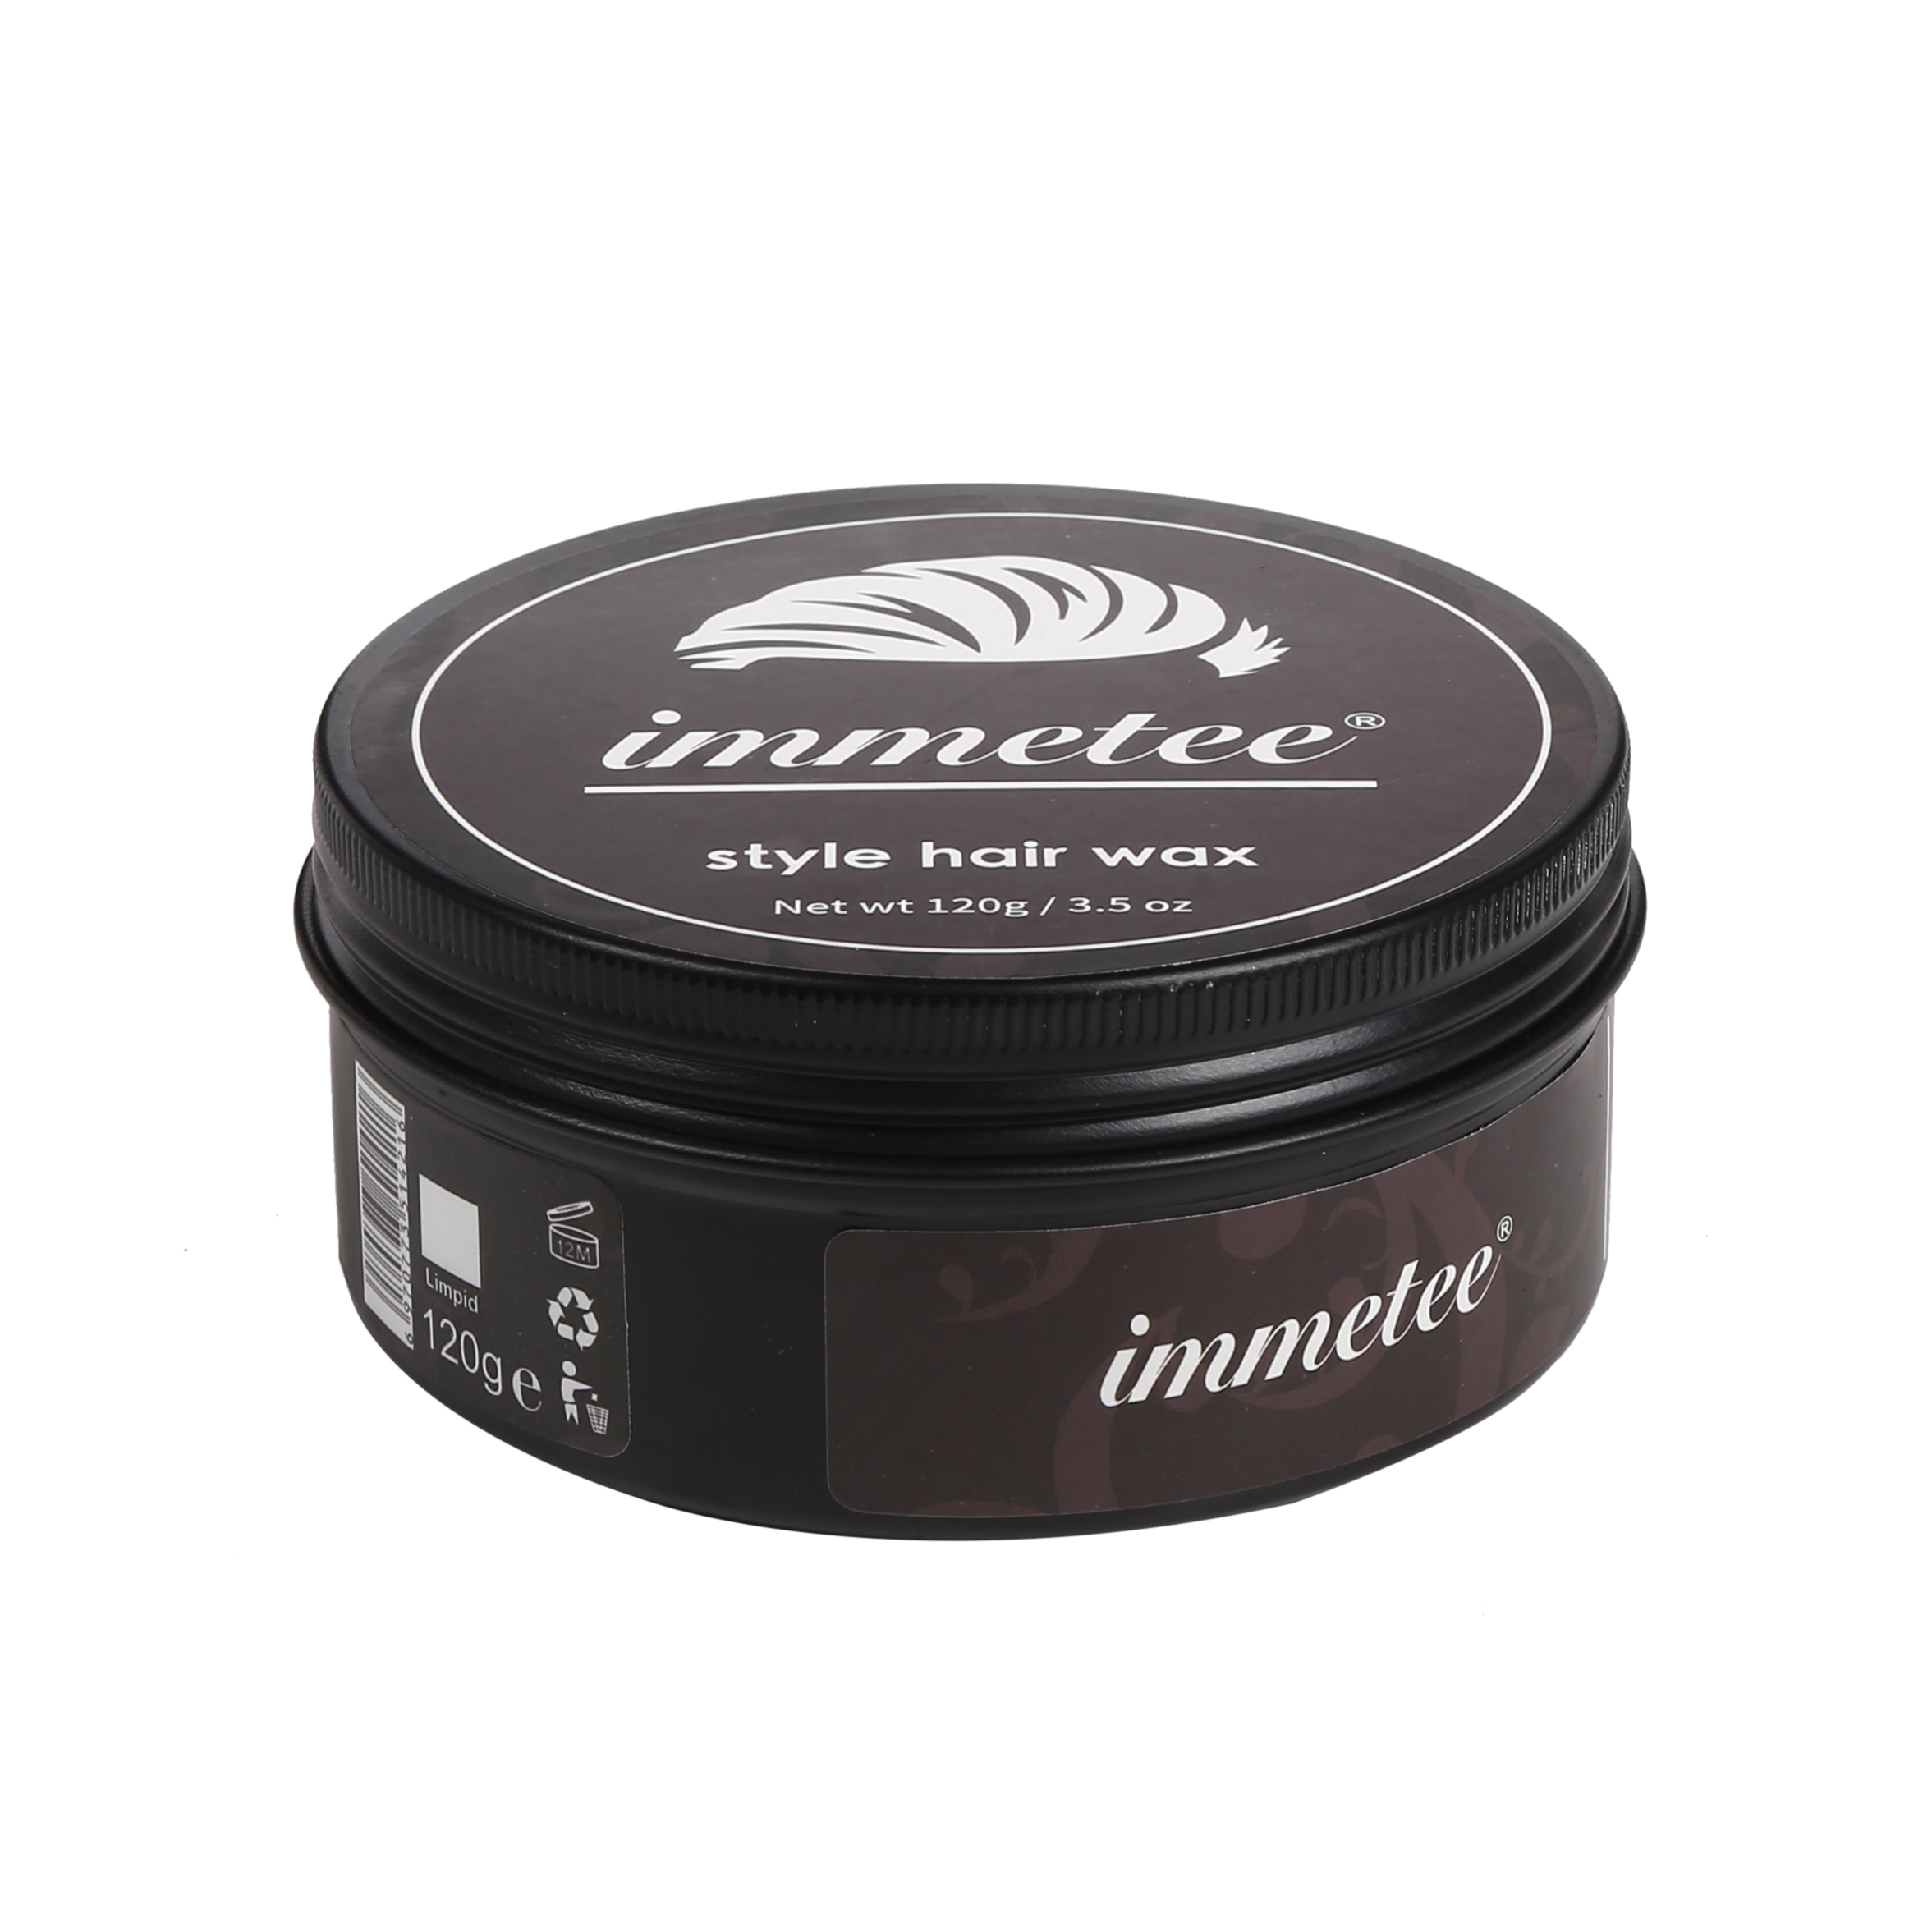 IMMETEE Hair Pomade Men Styling Makeup Natural Hairstyle Product Hair Color Wax For Men&Women Hair Styling Blonde 120g